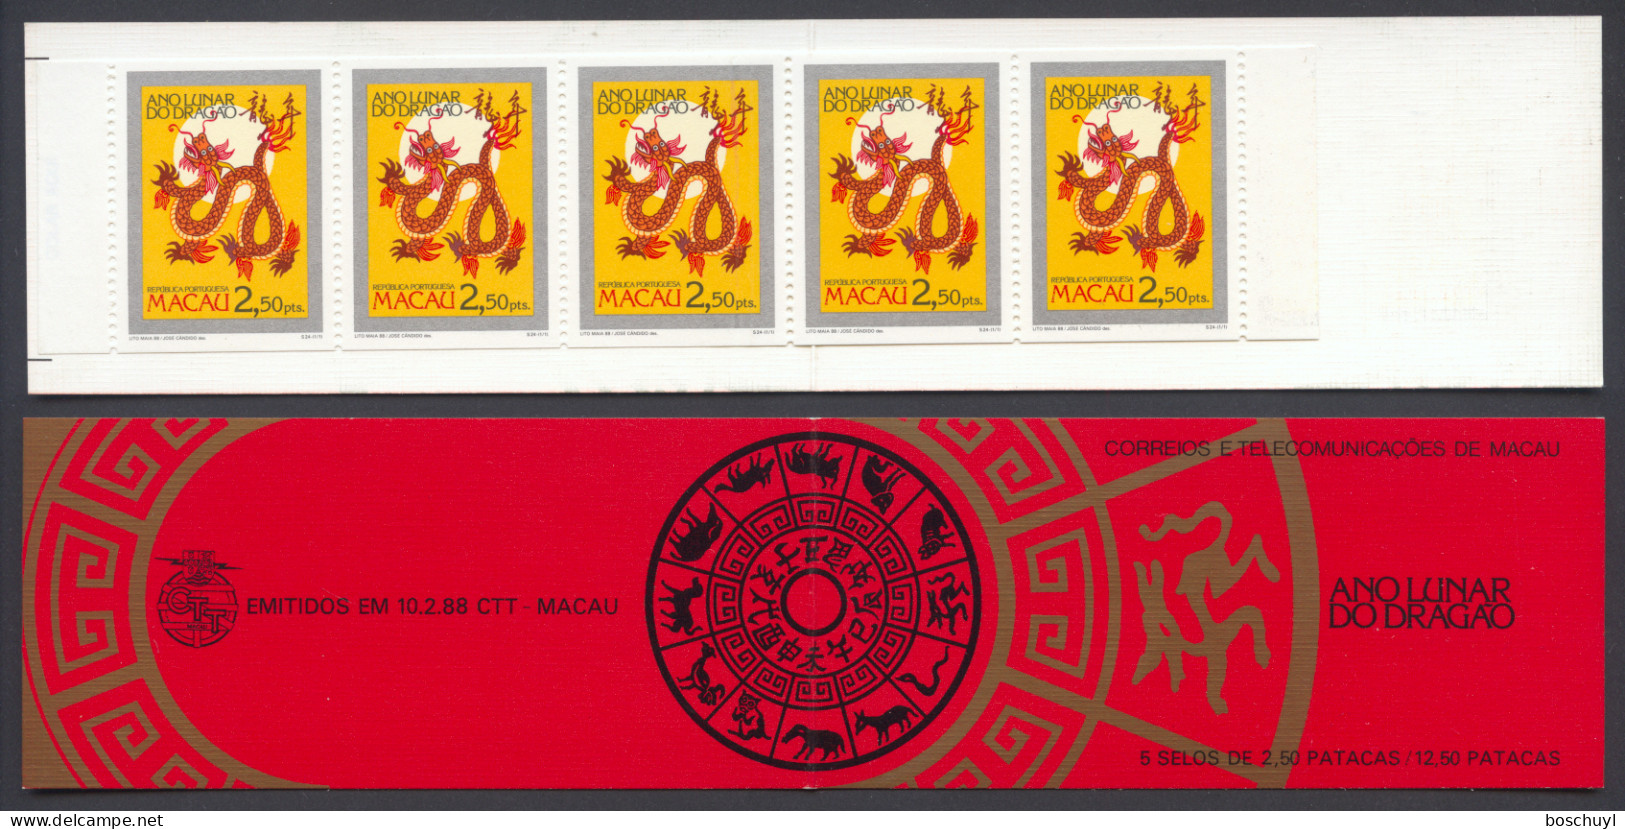 Macau, 1988, Year Of The Dragon, Chinese New Year, MNH Booklet, Michel MH 588C - Carnets